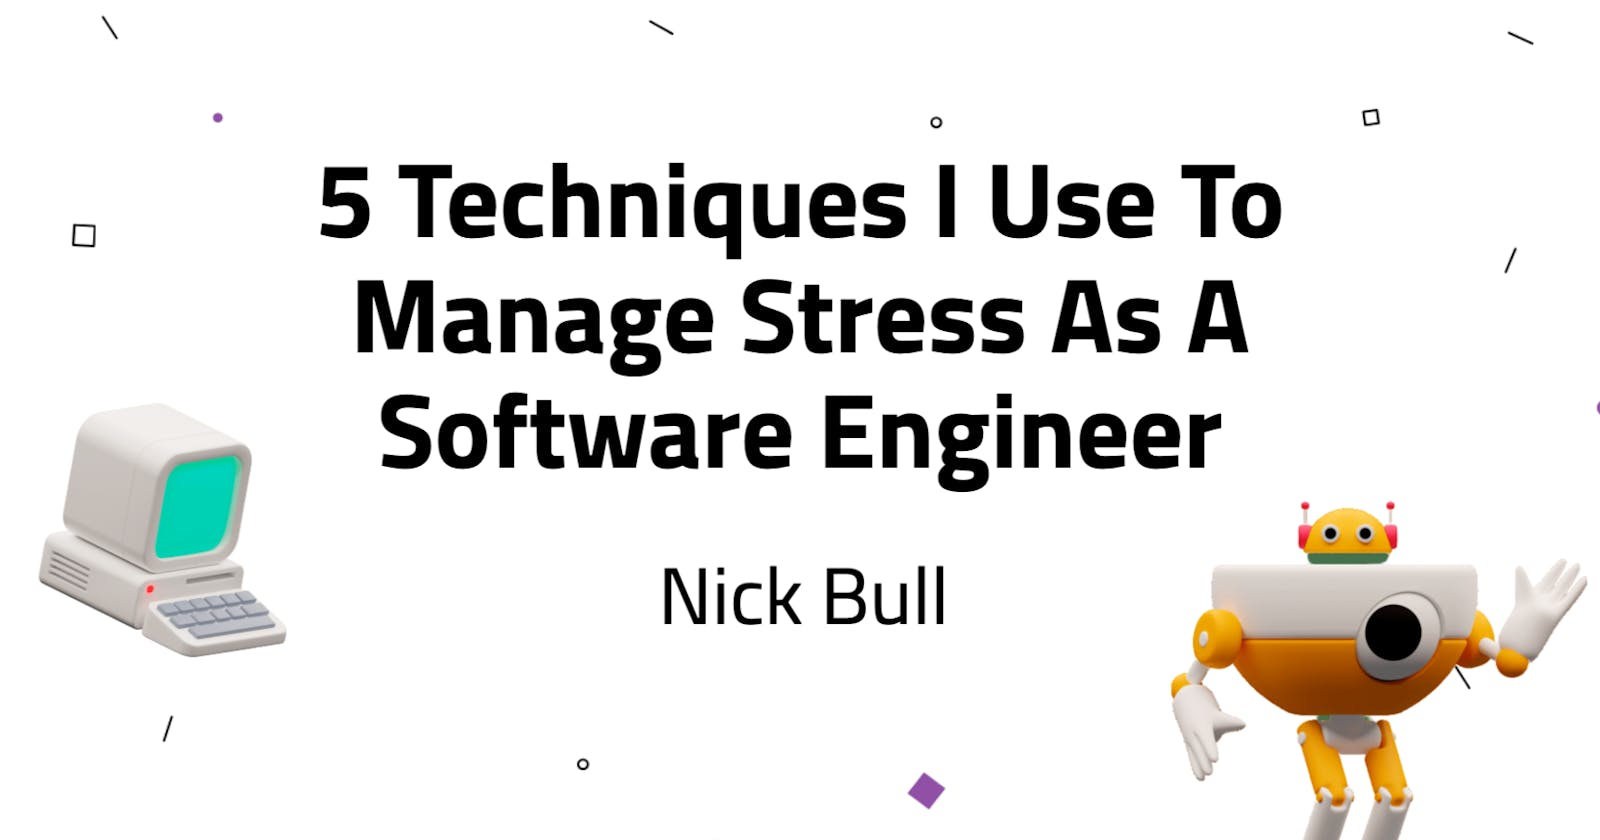 5 Techniques I Use To Manage Stress As A Software Engineer